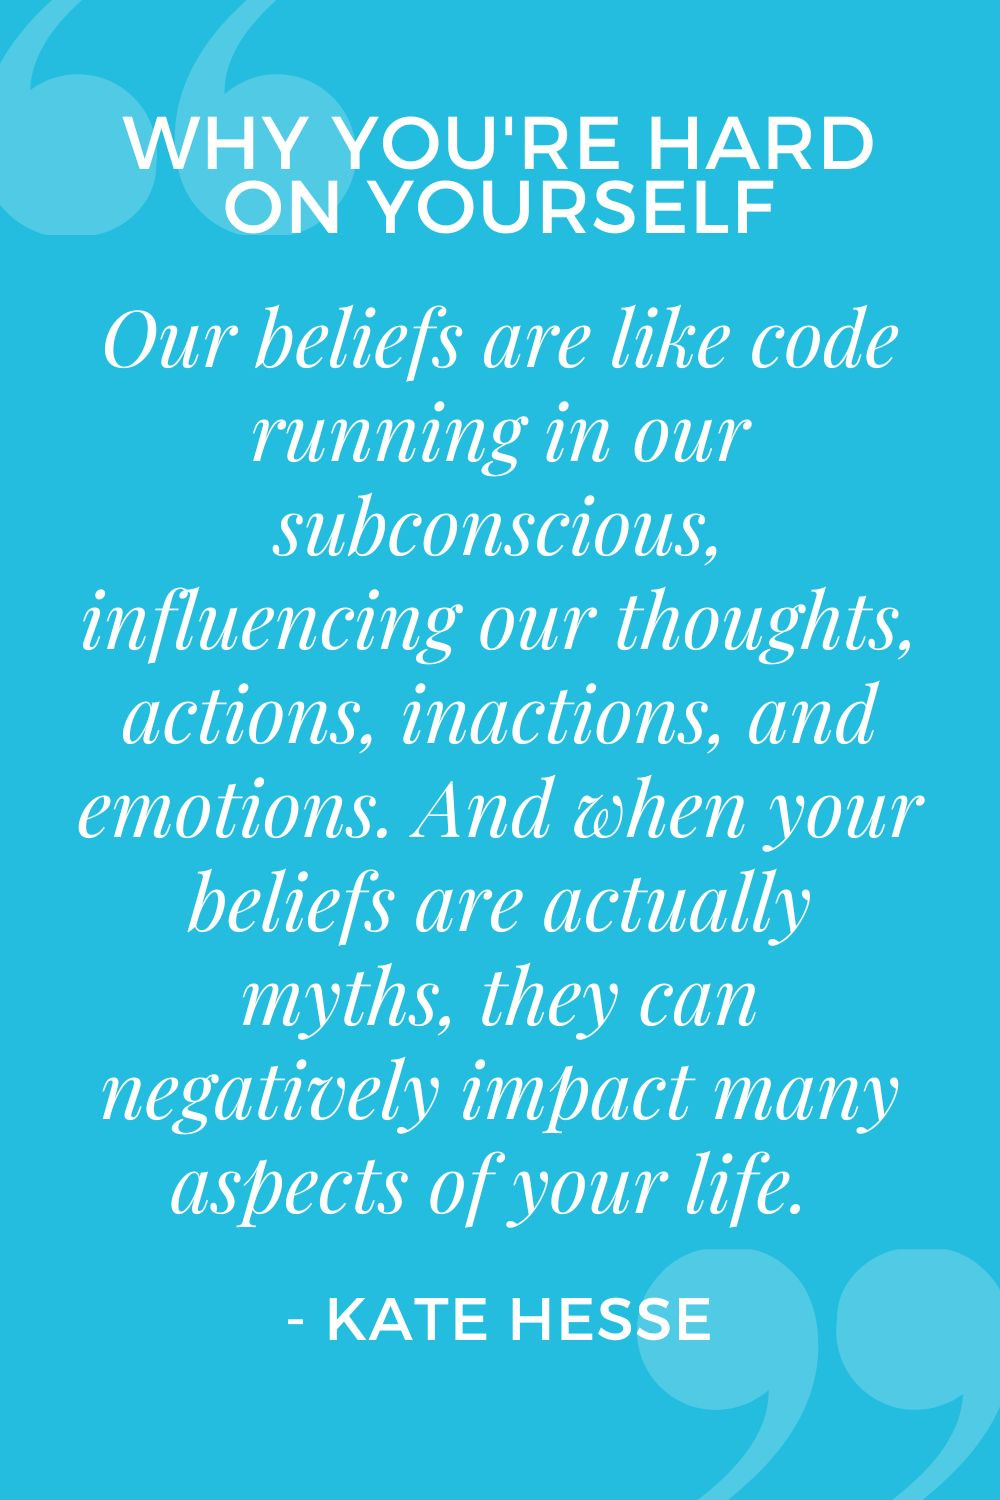 Our beliefs are like code running in our subconscious, influencing our thoughts, actions, inactions, and emotions. And when your beliefs are actually myths, they can negatively impact many aspects of your life.